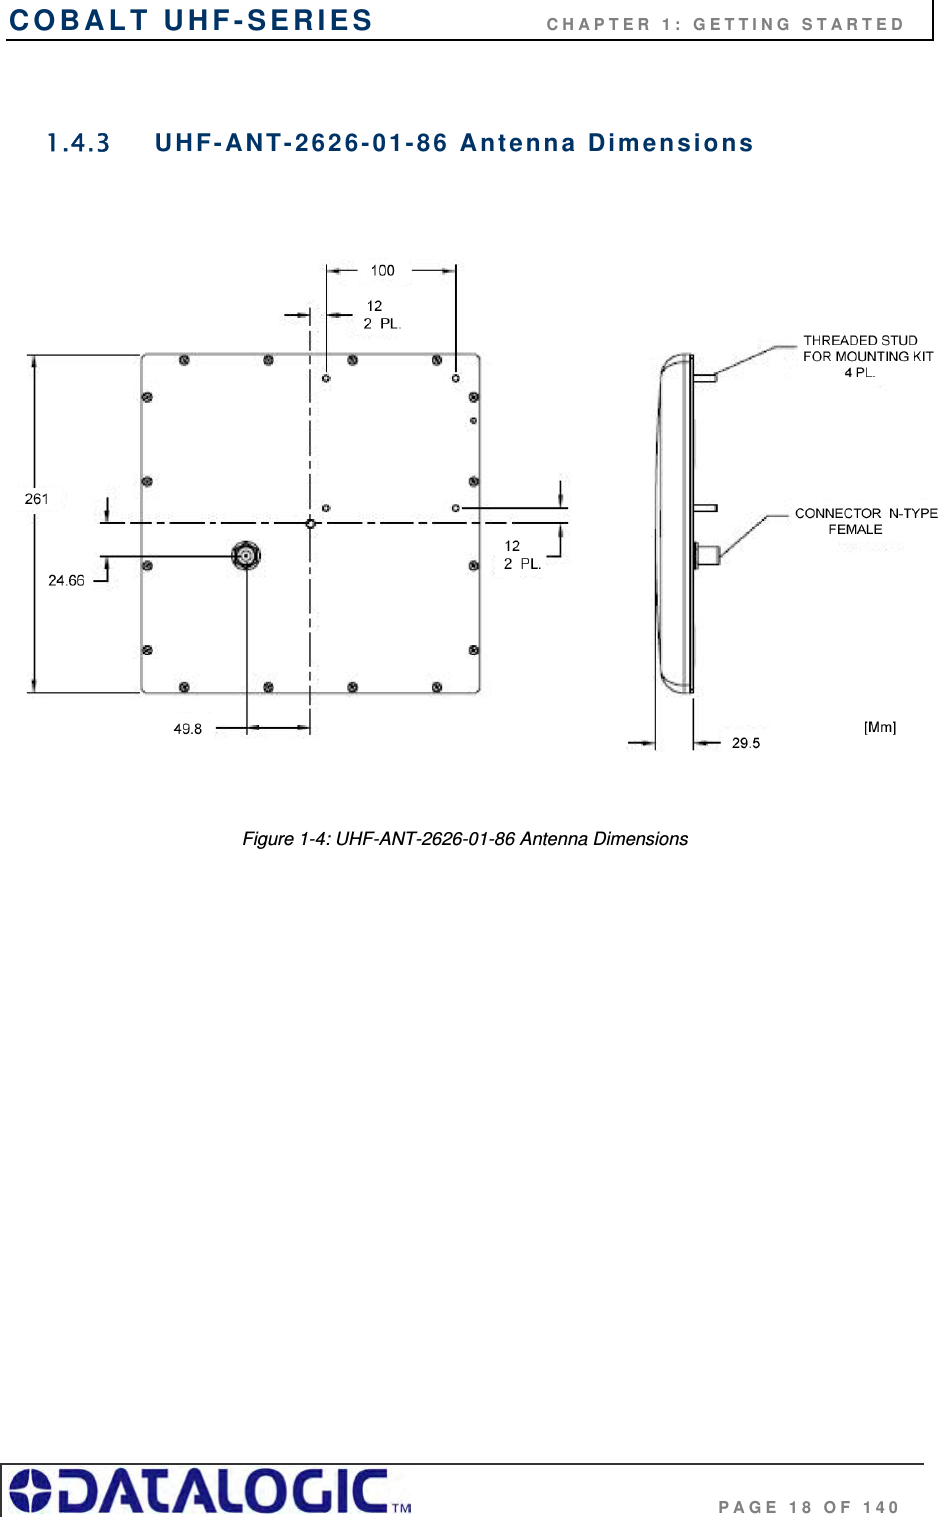 COBALT UHF-SERIES                    CHAPTER 1: GETTING STARTED                                     PAGE 18 OF 140  1.4.3  UHF-ANT-2626-01-86 Antenna Dimensions     Figure 1-4: UHF-ANT-2626-01-86 Antenna Dimensions 